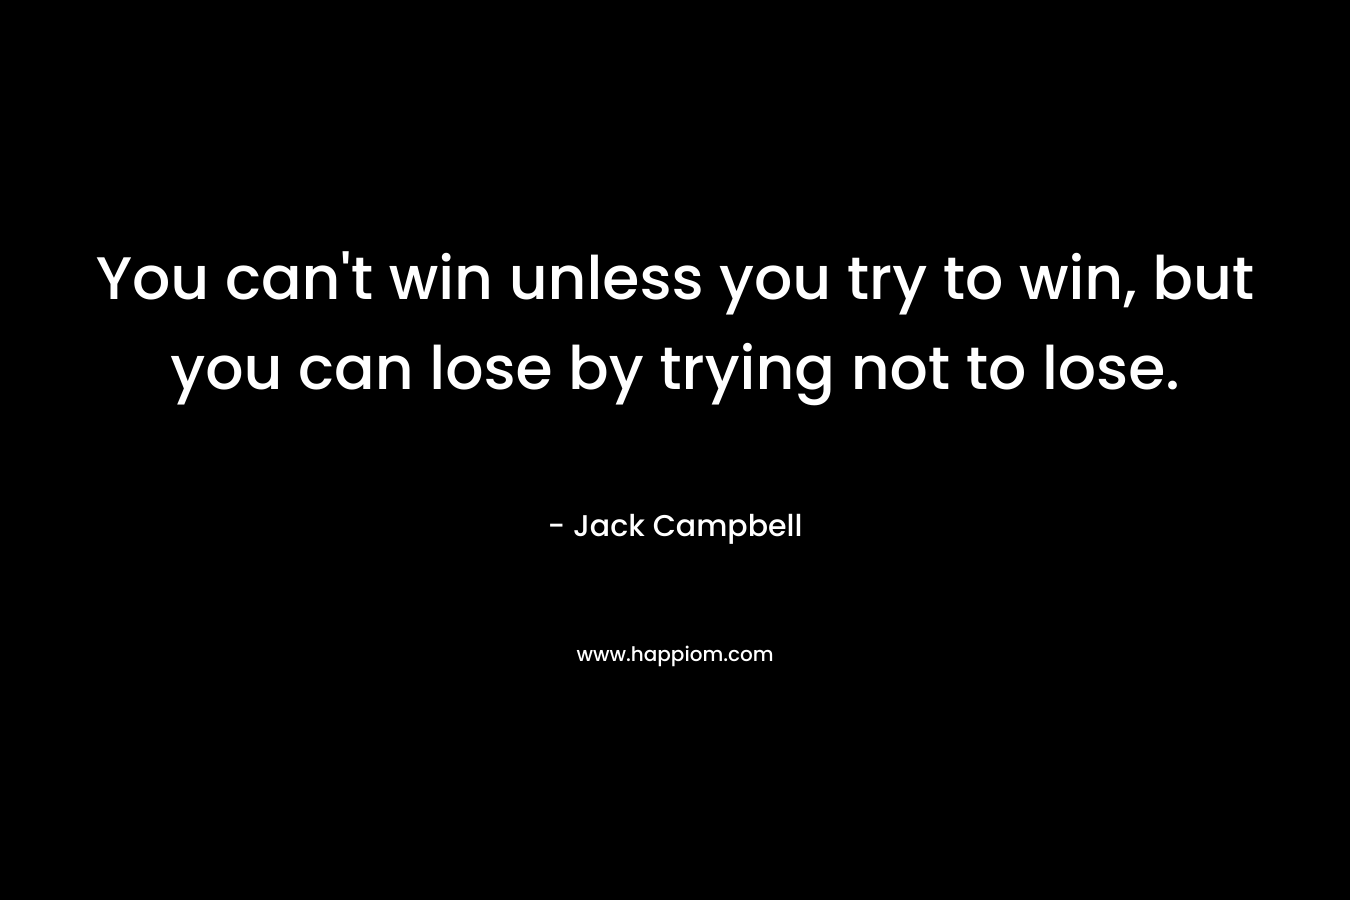 You can’t win unless you try to win, but you can lose by trying not to lose. – Jack Campbell